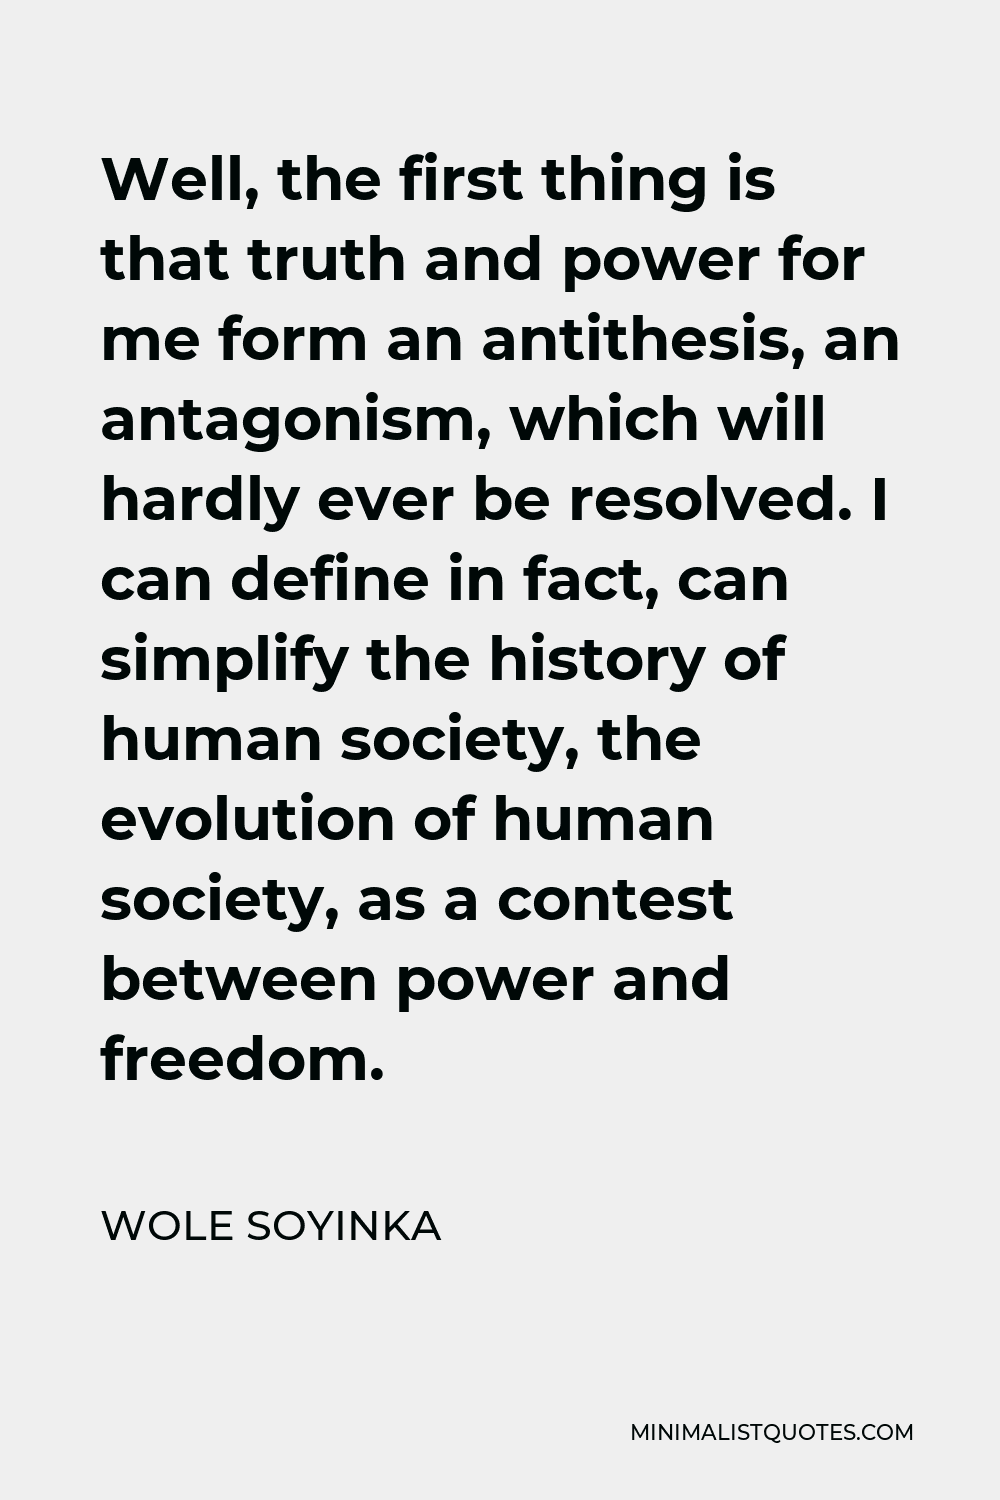 Wole Soyinka Quote - Well, the first thing is that truth and power for me form an antithesis, an antagonism, which will hardly ever be resolved. I can define in fact, can simplify the history of human society, the evolution of human society, as a contest between power and freedom.